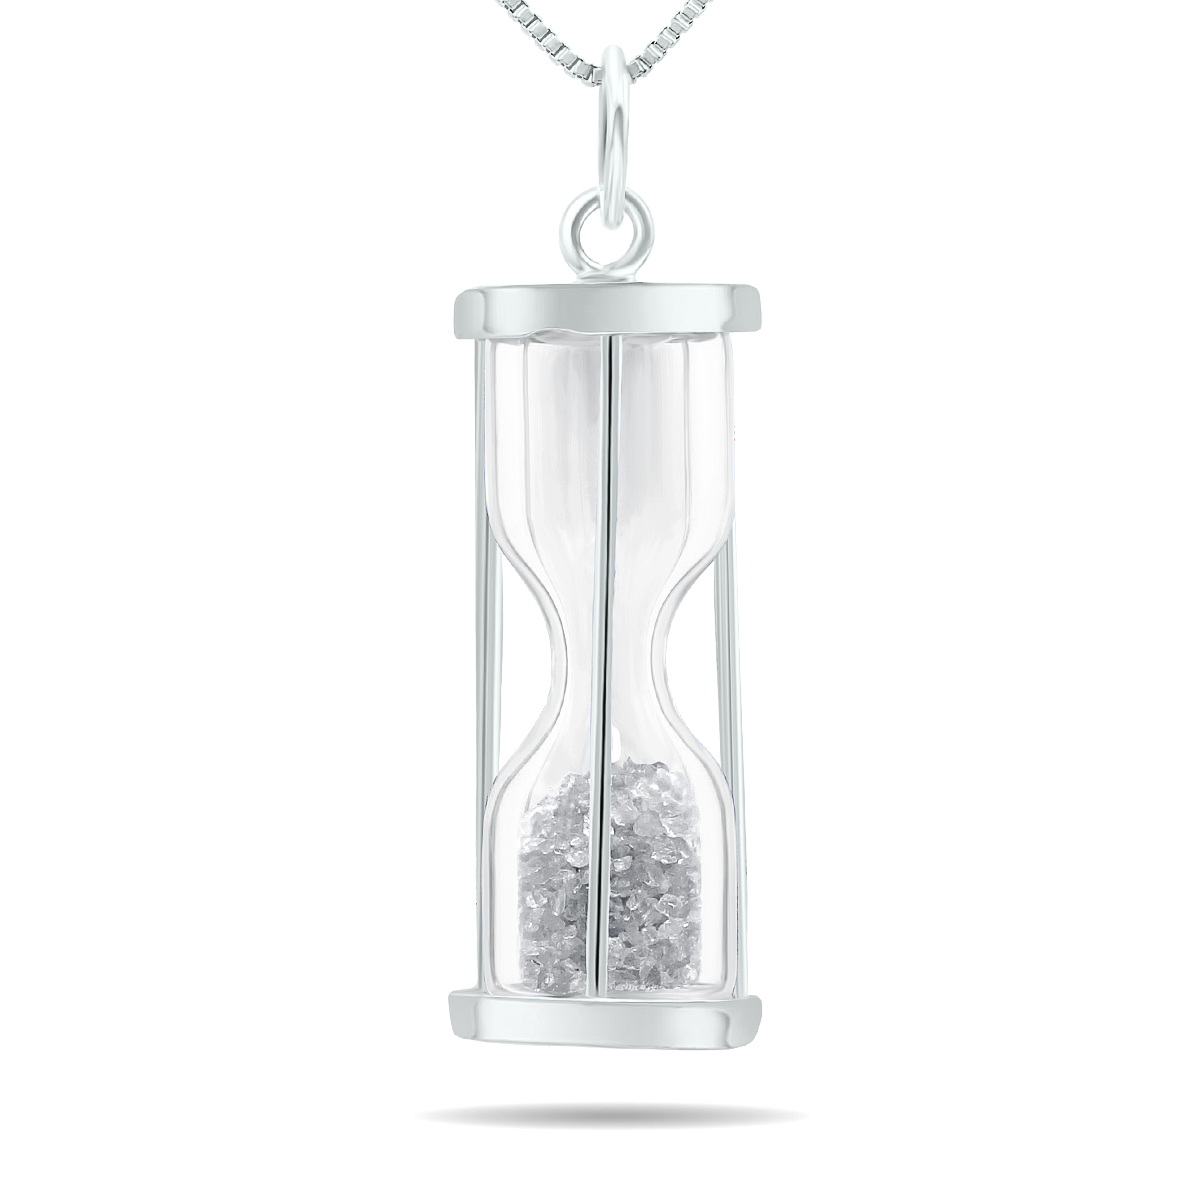 Tooth Fairy Pixie Dust Gift - 1/2 Carat TW April Birthstone Diamond Dust Time in a Bottle Pendant in .925 Sterling Silver